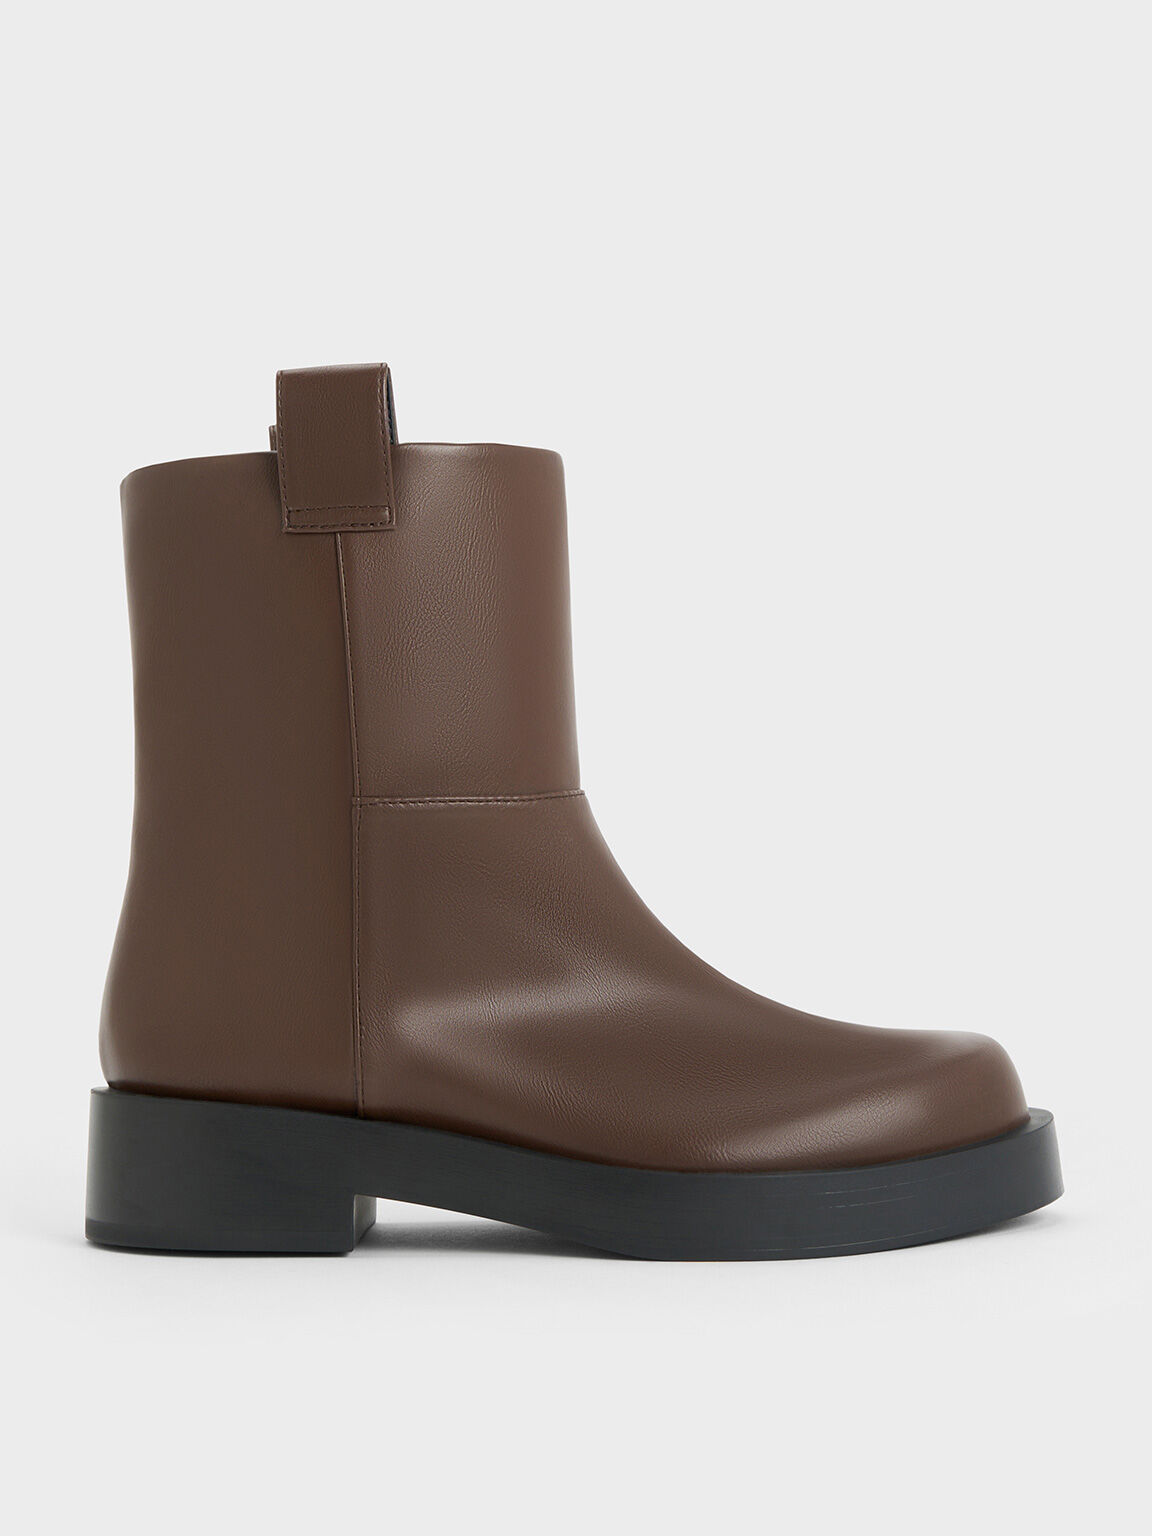 Double Pull-Tab Ankle Boots, Dark Brown, hi-res